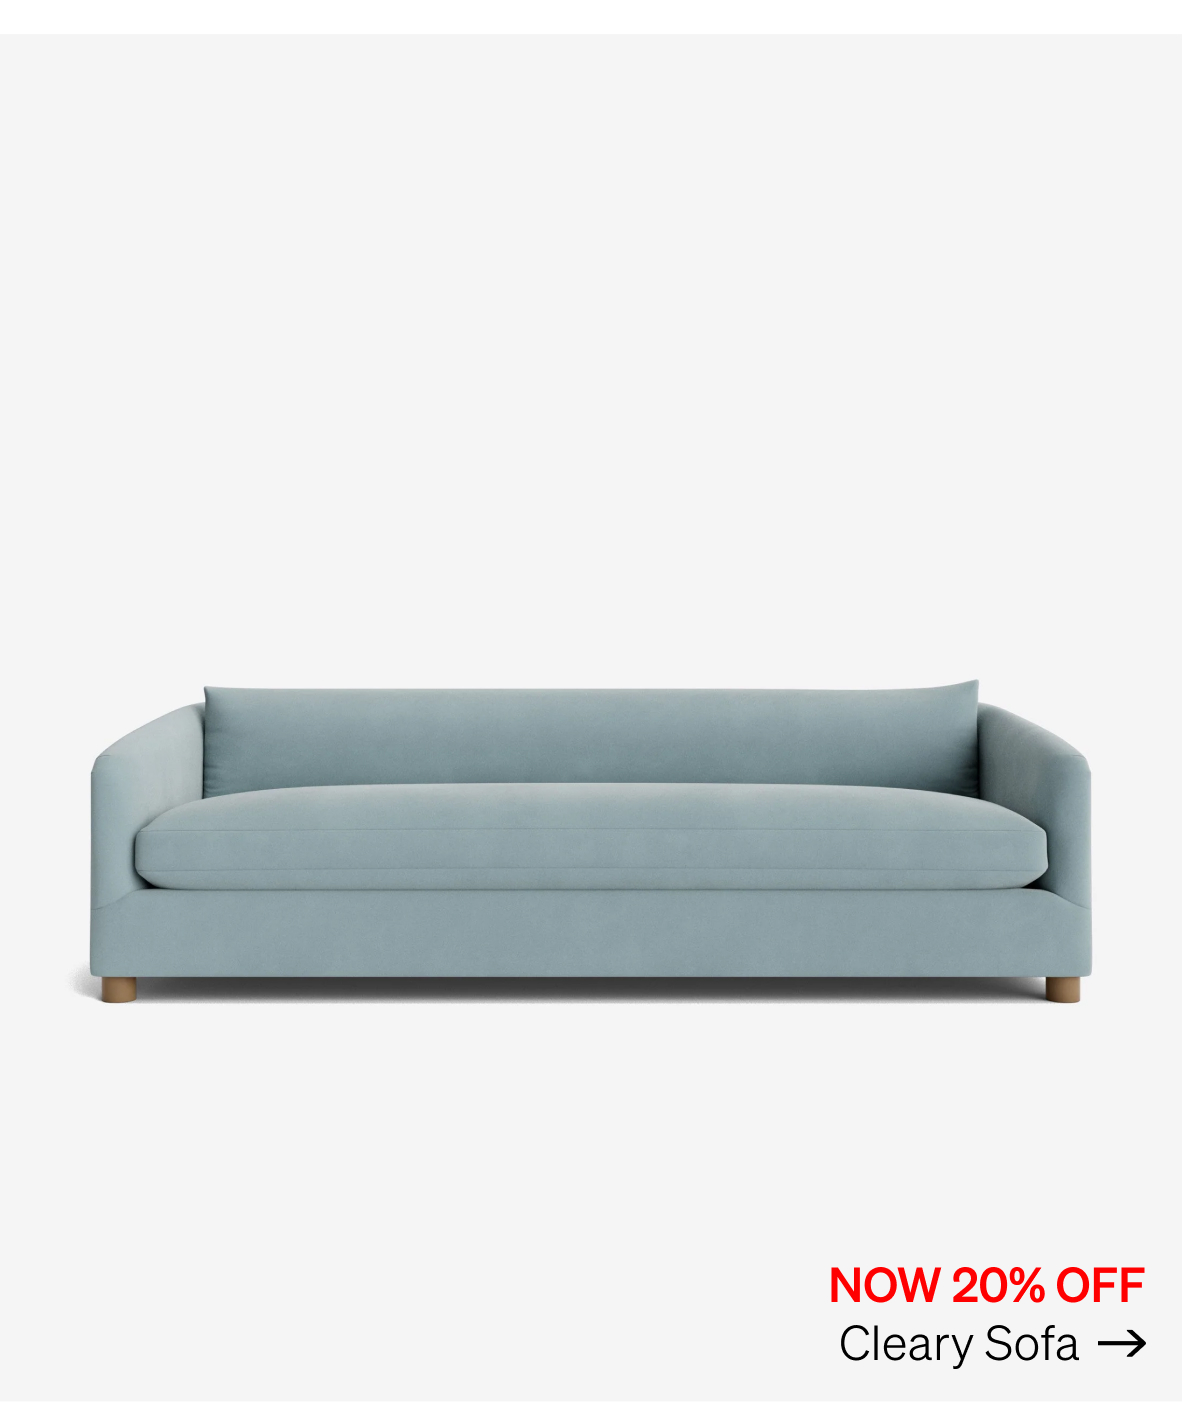 Shop Cleary Sofa